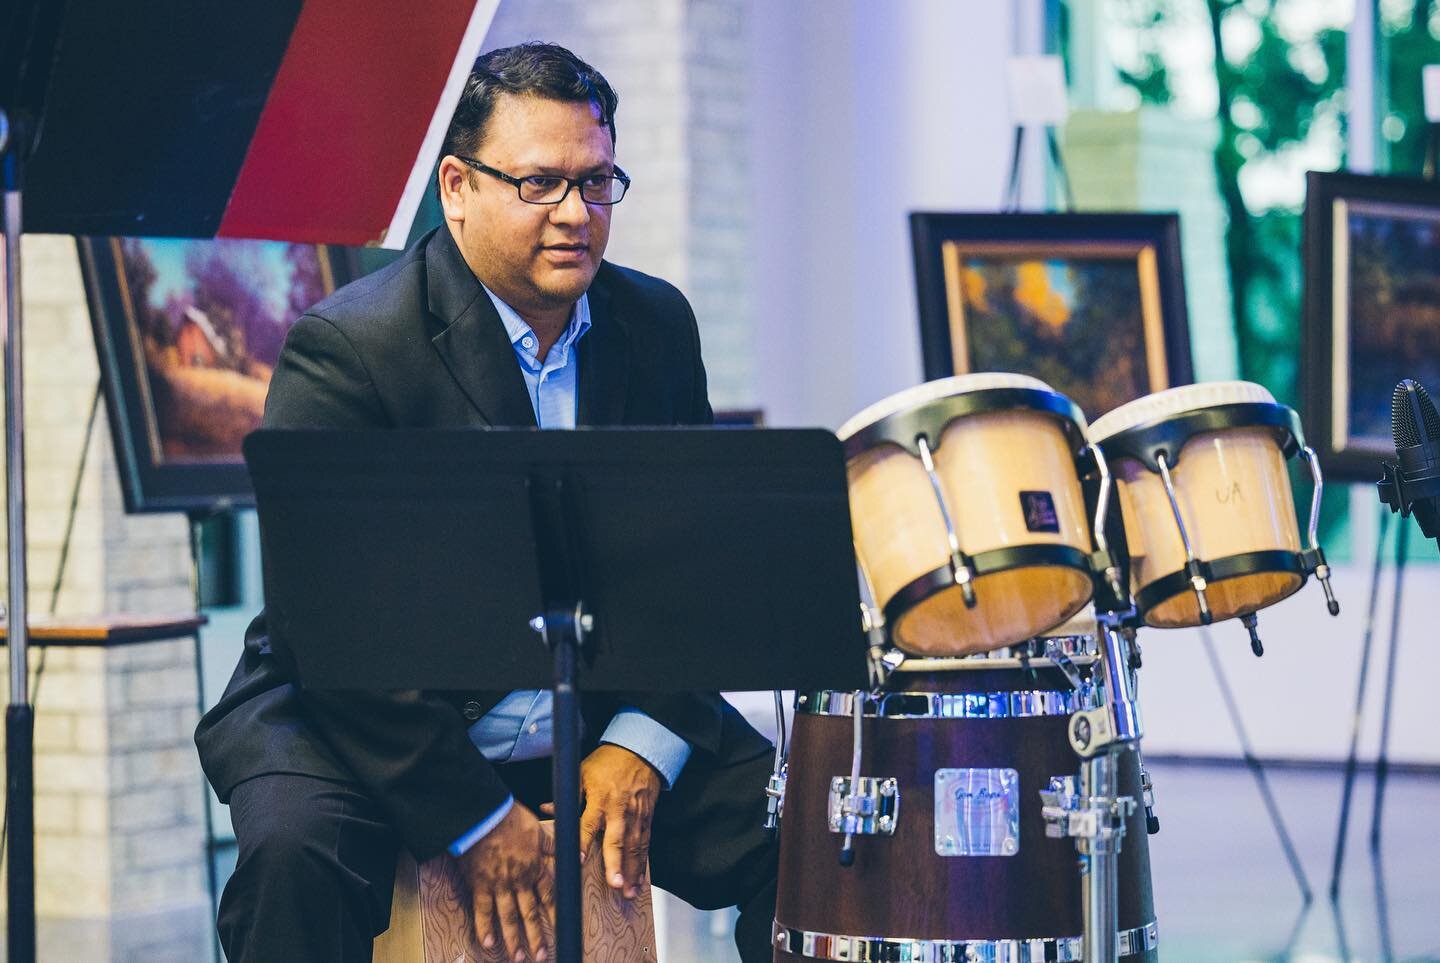 Musician Spotlight: Fernando Valencia, SoNA percusionist
Hear him this weekend at SoNA Beyond: Latin Traces @themedium_art 
From Fernando: &quot;The 'Latin Traces' program at the 214 Auditorium is a sample of the re-rooting and re-routing of musics o